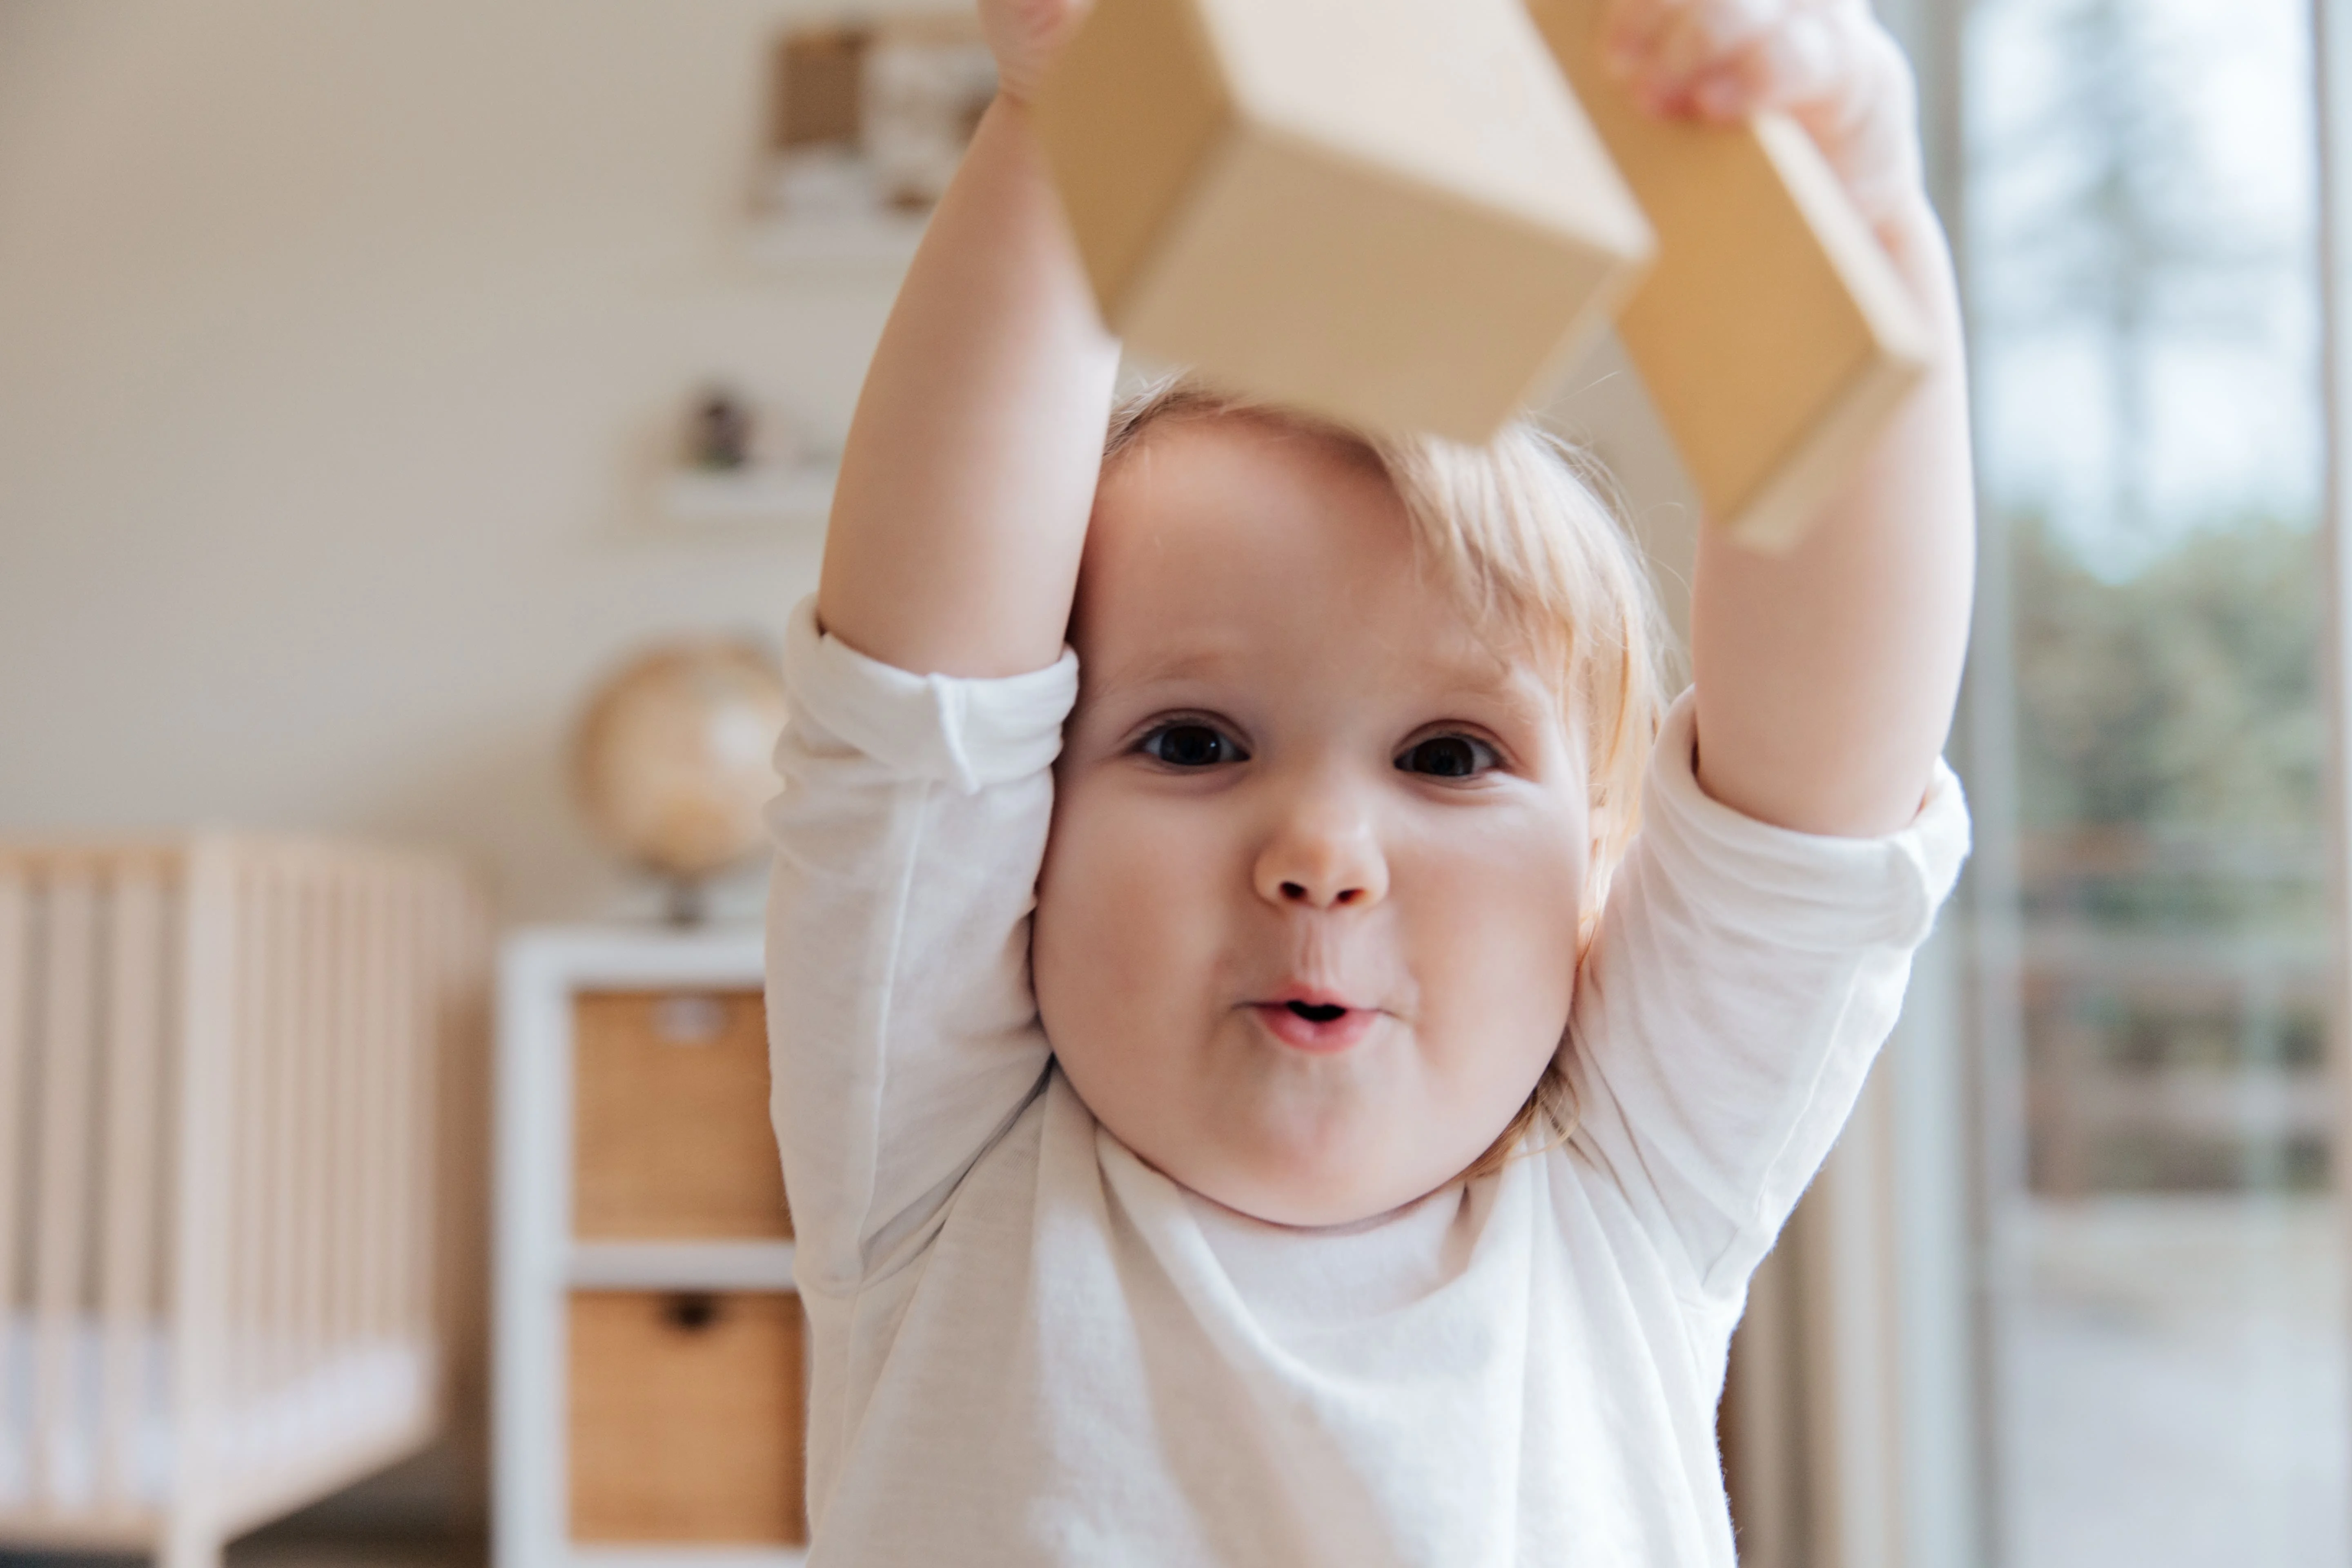 An infant is playing with blocks and showing physical changes in infancy.